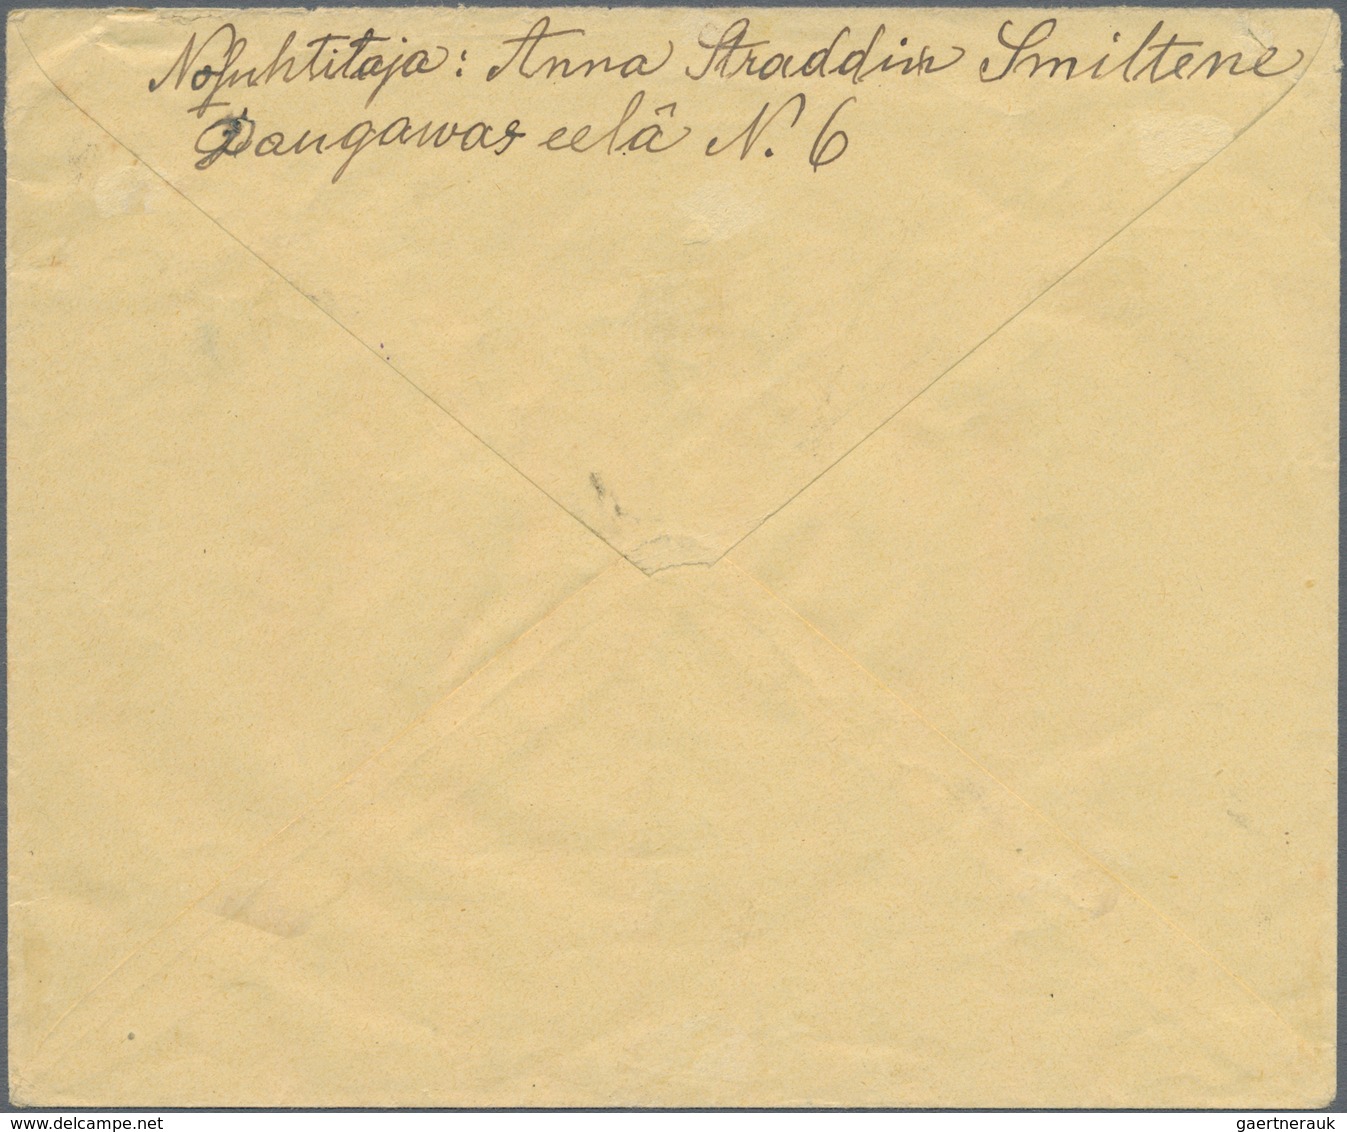 Lettland: 1919, Private Correspondence, Addressed In Latvian, Free Post Mail, Sent From Cyrillic SMI - Latvia